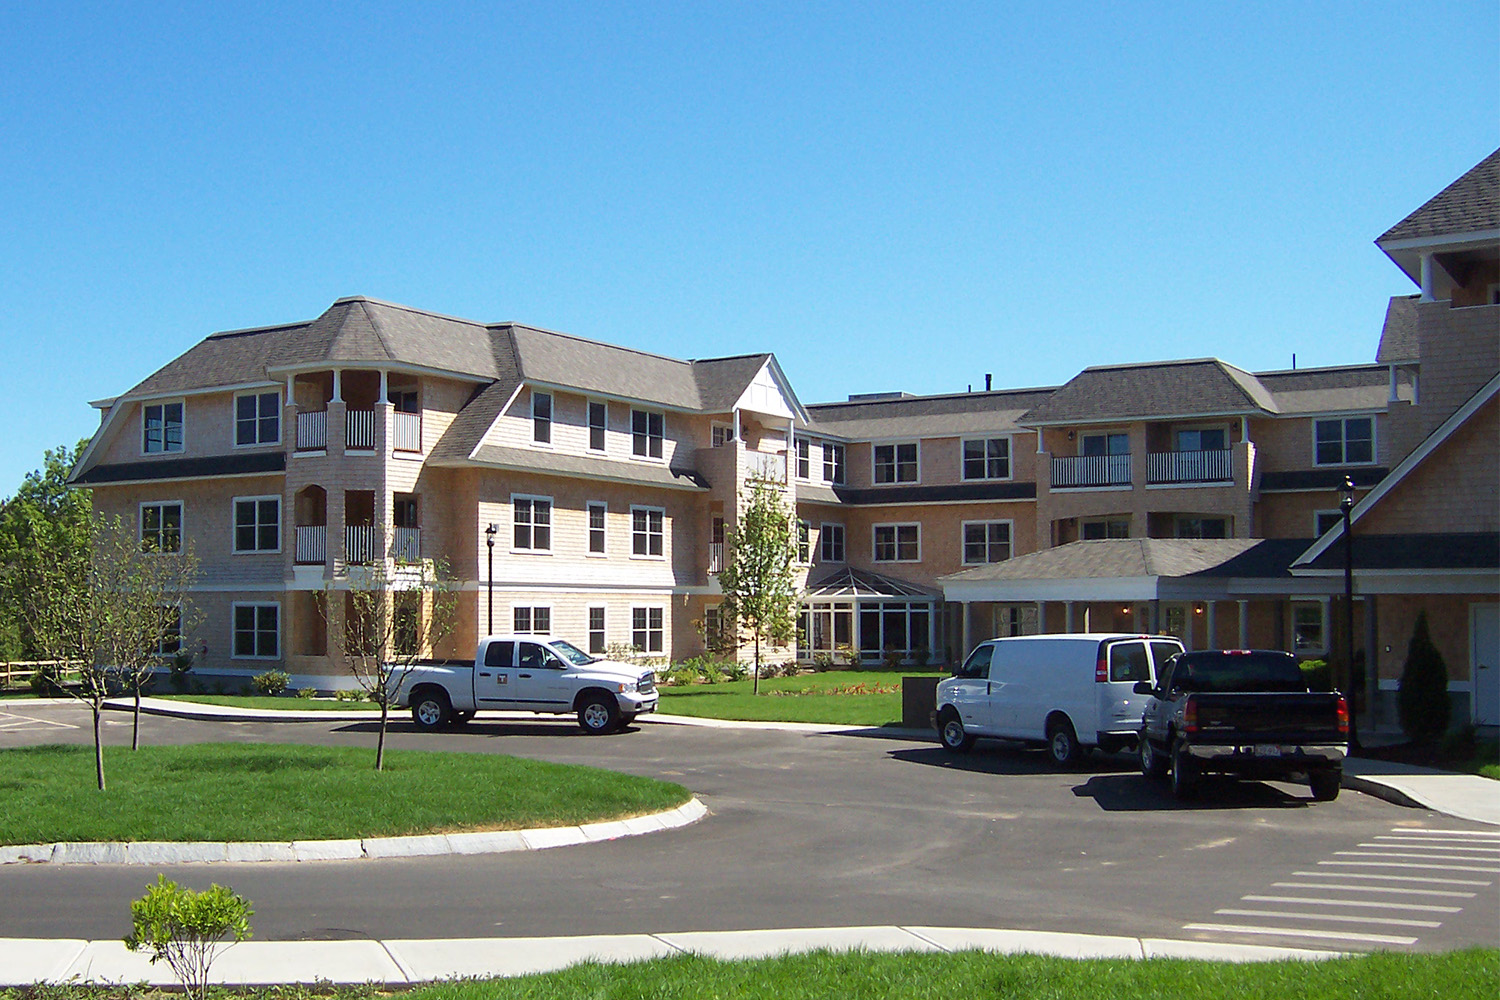 view of the Orleans Place senior living facility, seen from across the street 